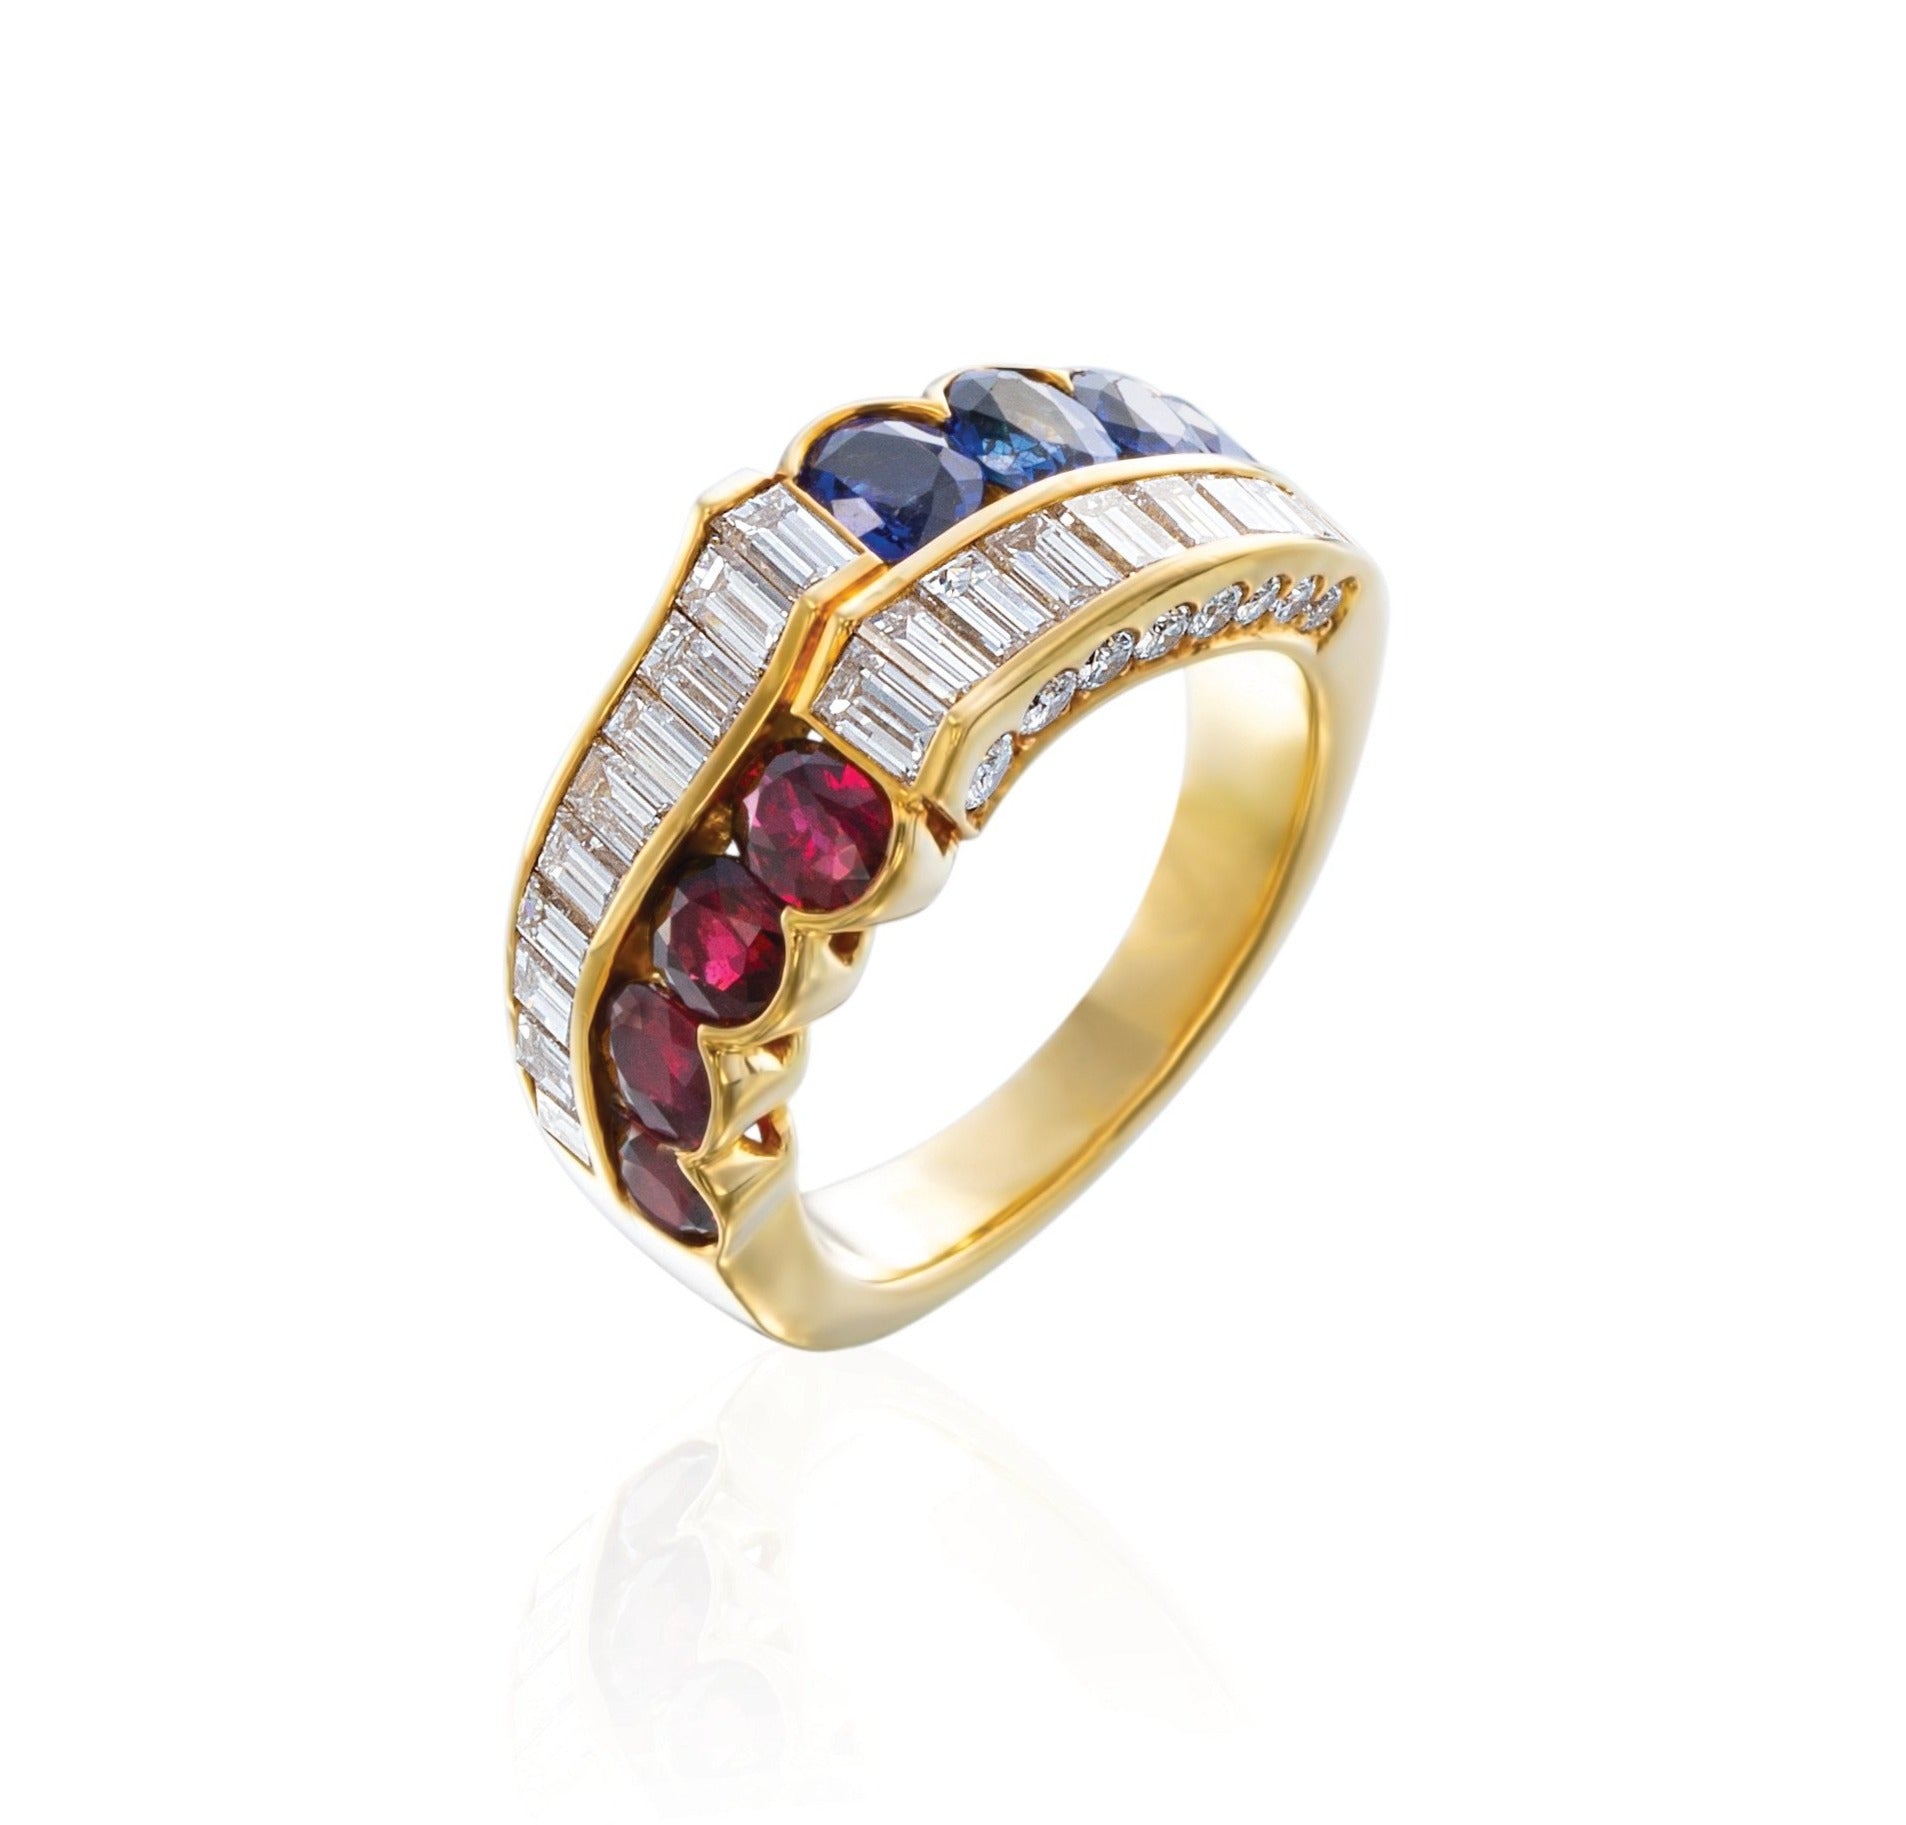 Diamond, Sapphire and Ruby Ring in 18k Gold